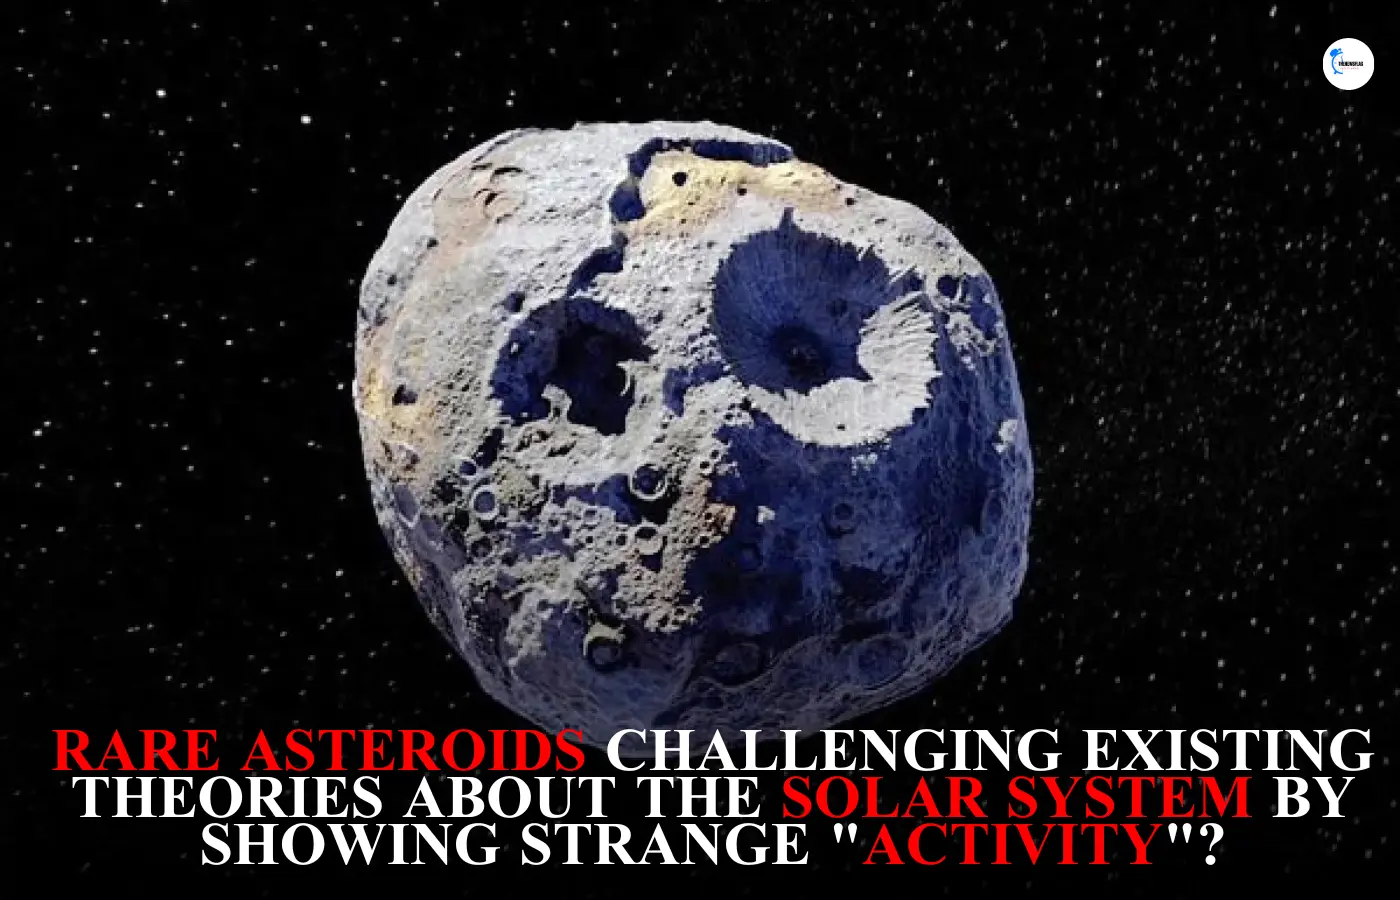 Rare Asteroids challenging existing theories about the solar system by showing strange 'Activity'?